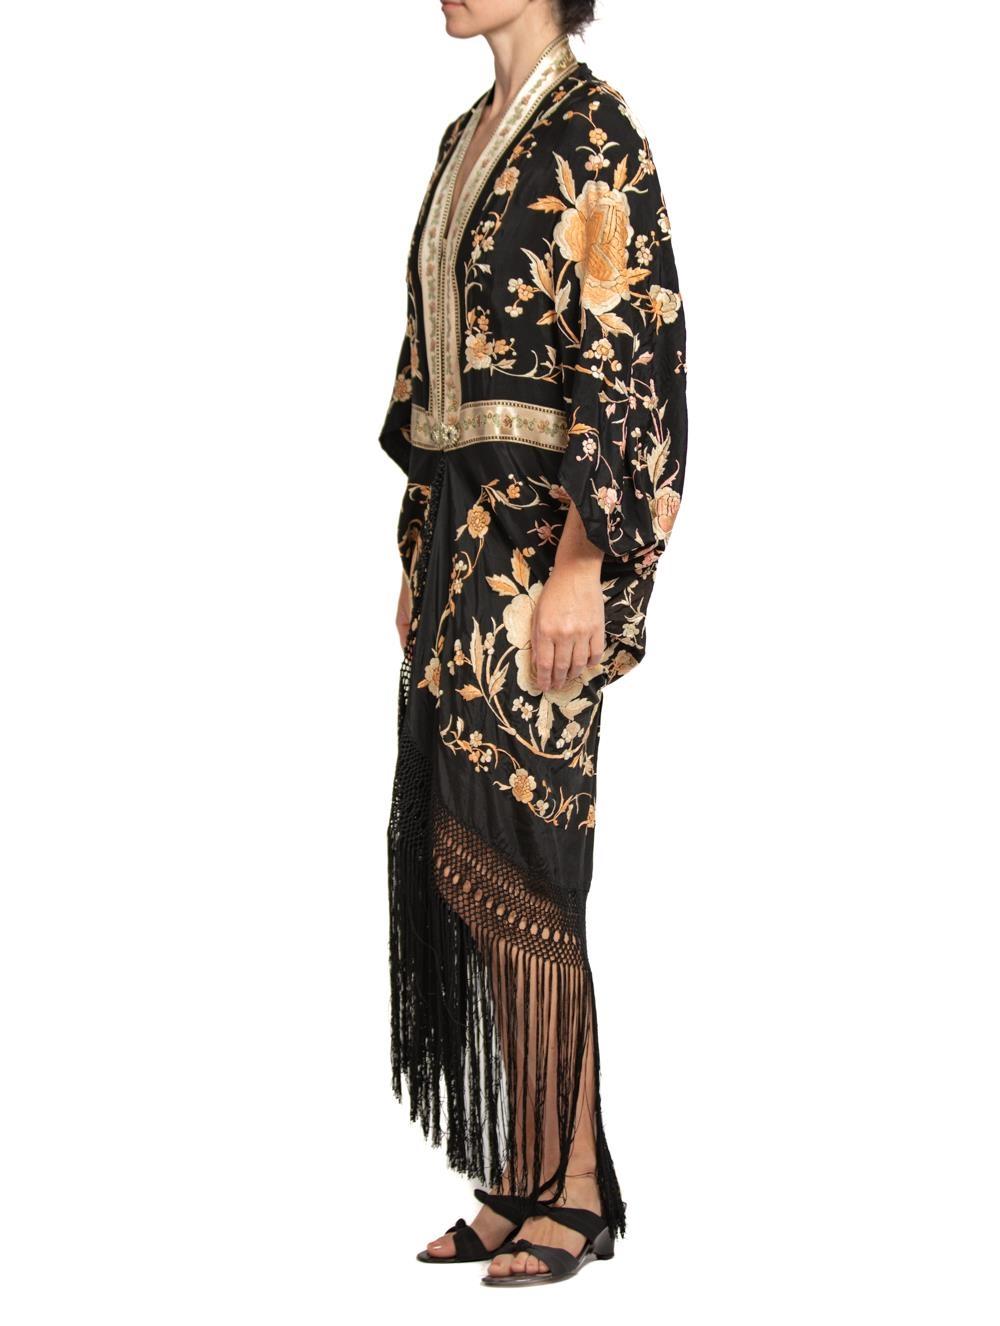 MORPHEW COLLECTION Black & Champagne Silk Floral Hand Embroidered Piano Shawl  Cocoon With A 1870'S Victorian Clasp
MORPHEW COLLECTION is made entirely by hand in our NYC Ateliér of rare antique materials sourced from around the globe. Our